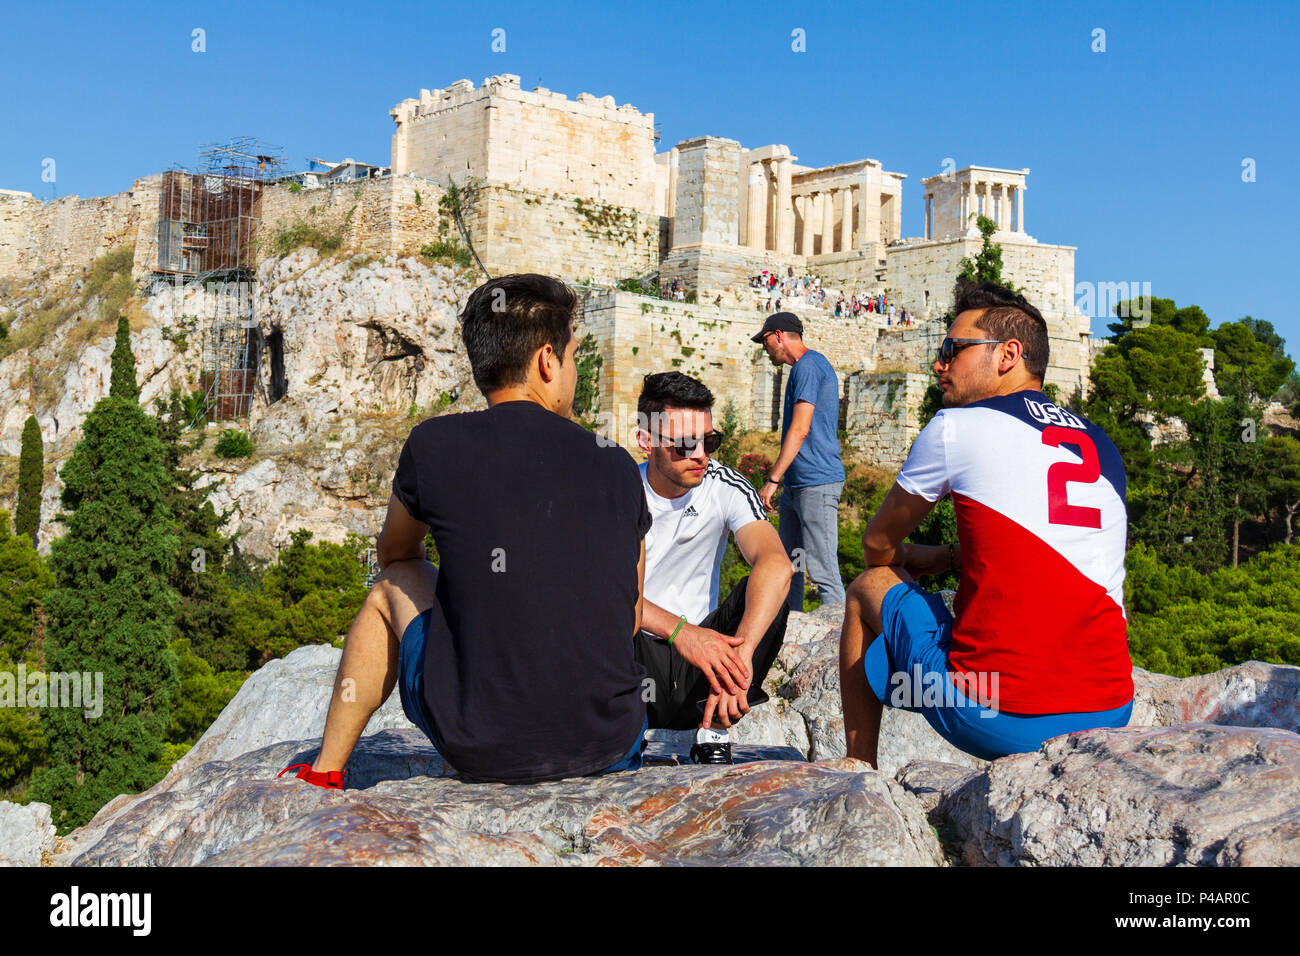 Athens, Greece - June 9, 2018: Boys seated on a rock and chatting against the Acropoilis ruins in Athens, Greece on a summer afternoon Stock Photo